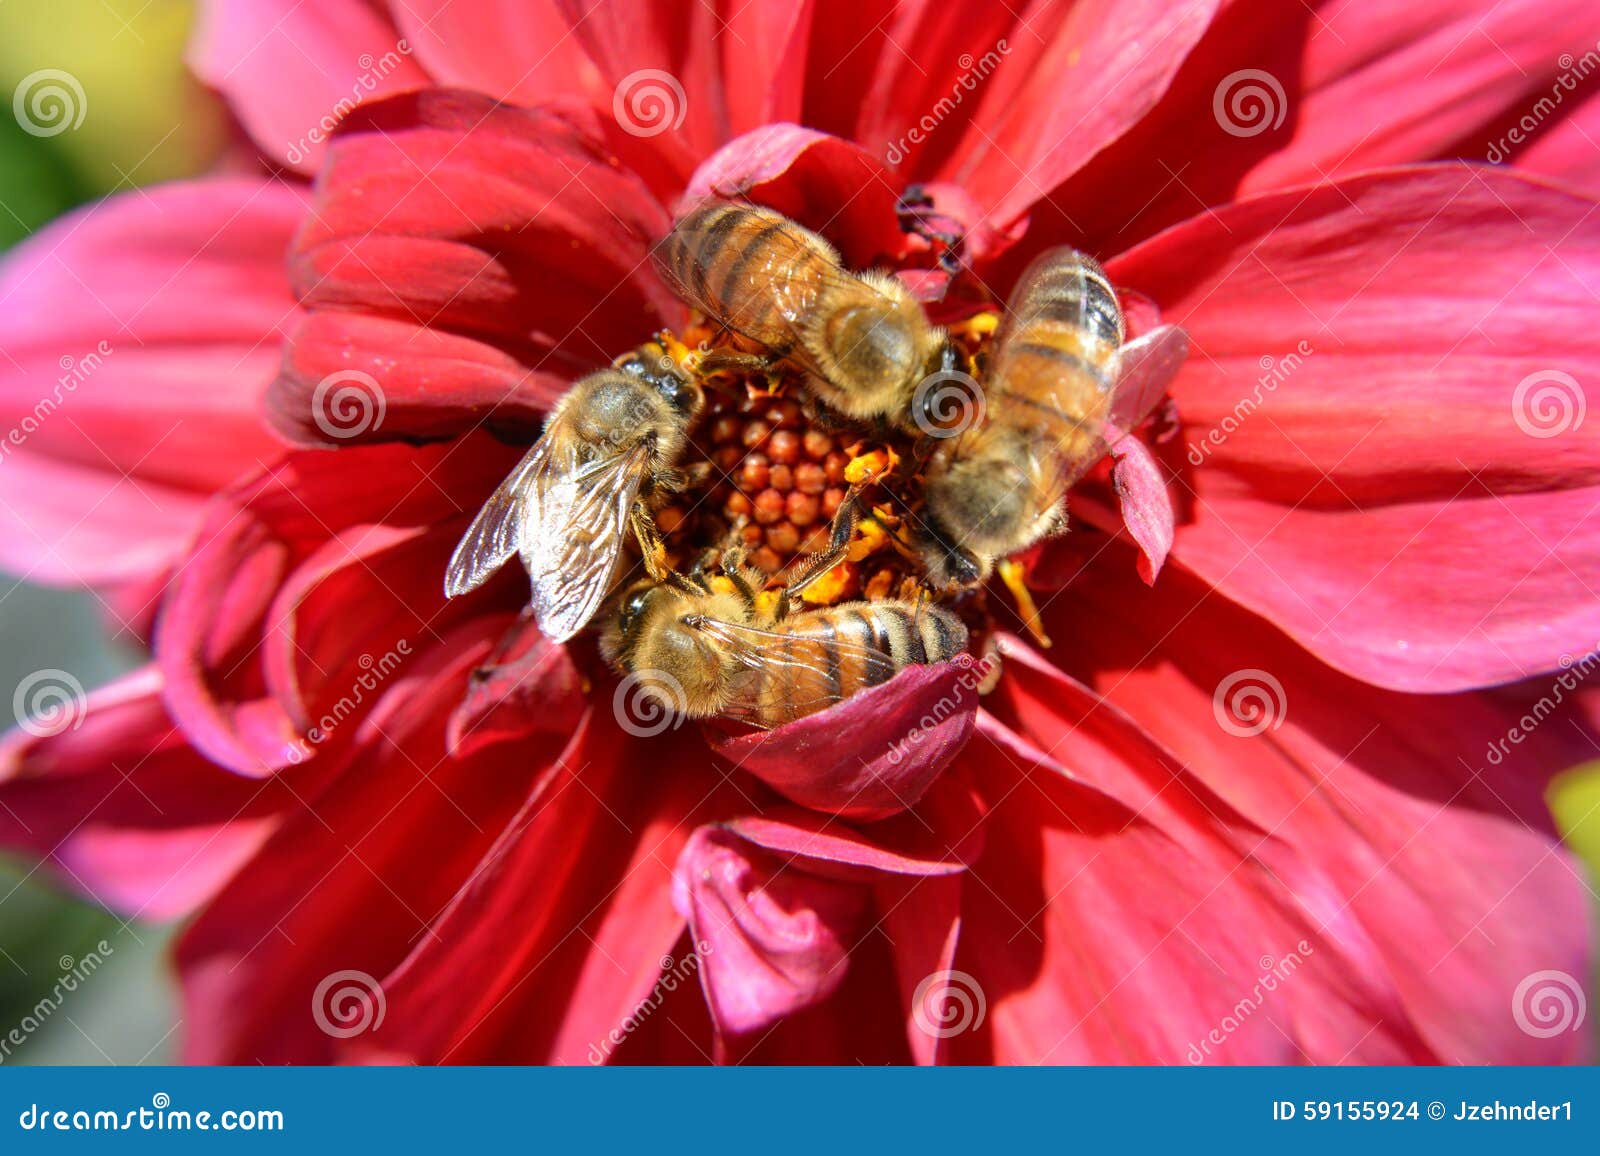 bees swarm pollinate a red flower in macro closeup